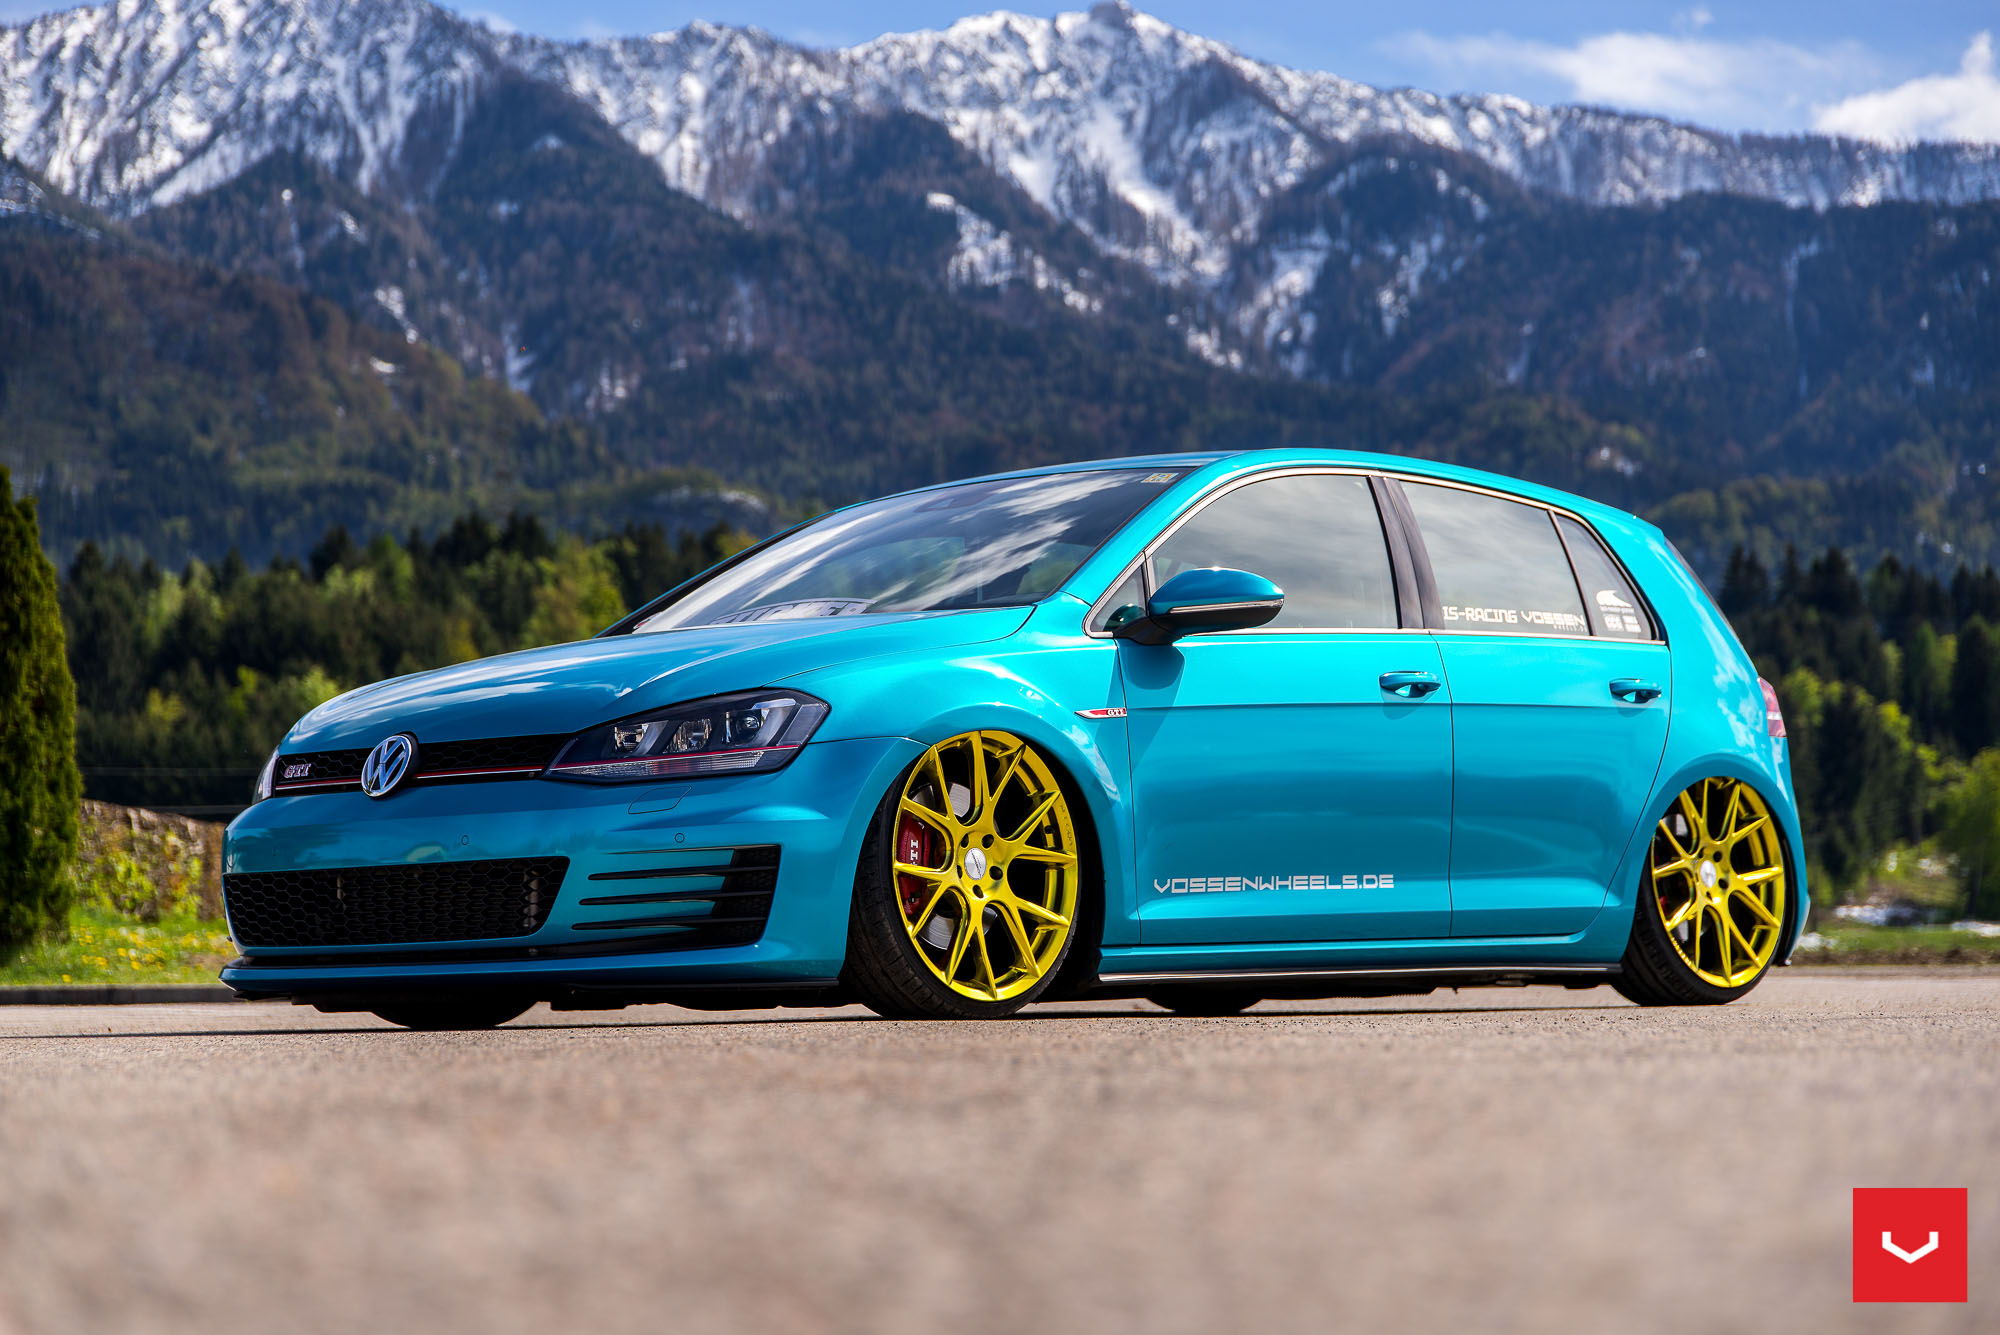 Competing with the Cherry 7 Down Golf R Sportwagen and RS6 for brightest co...